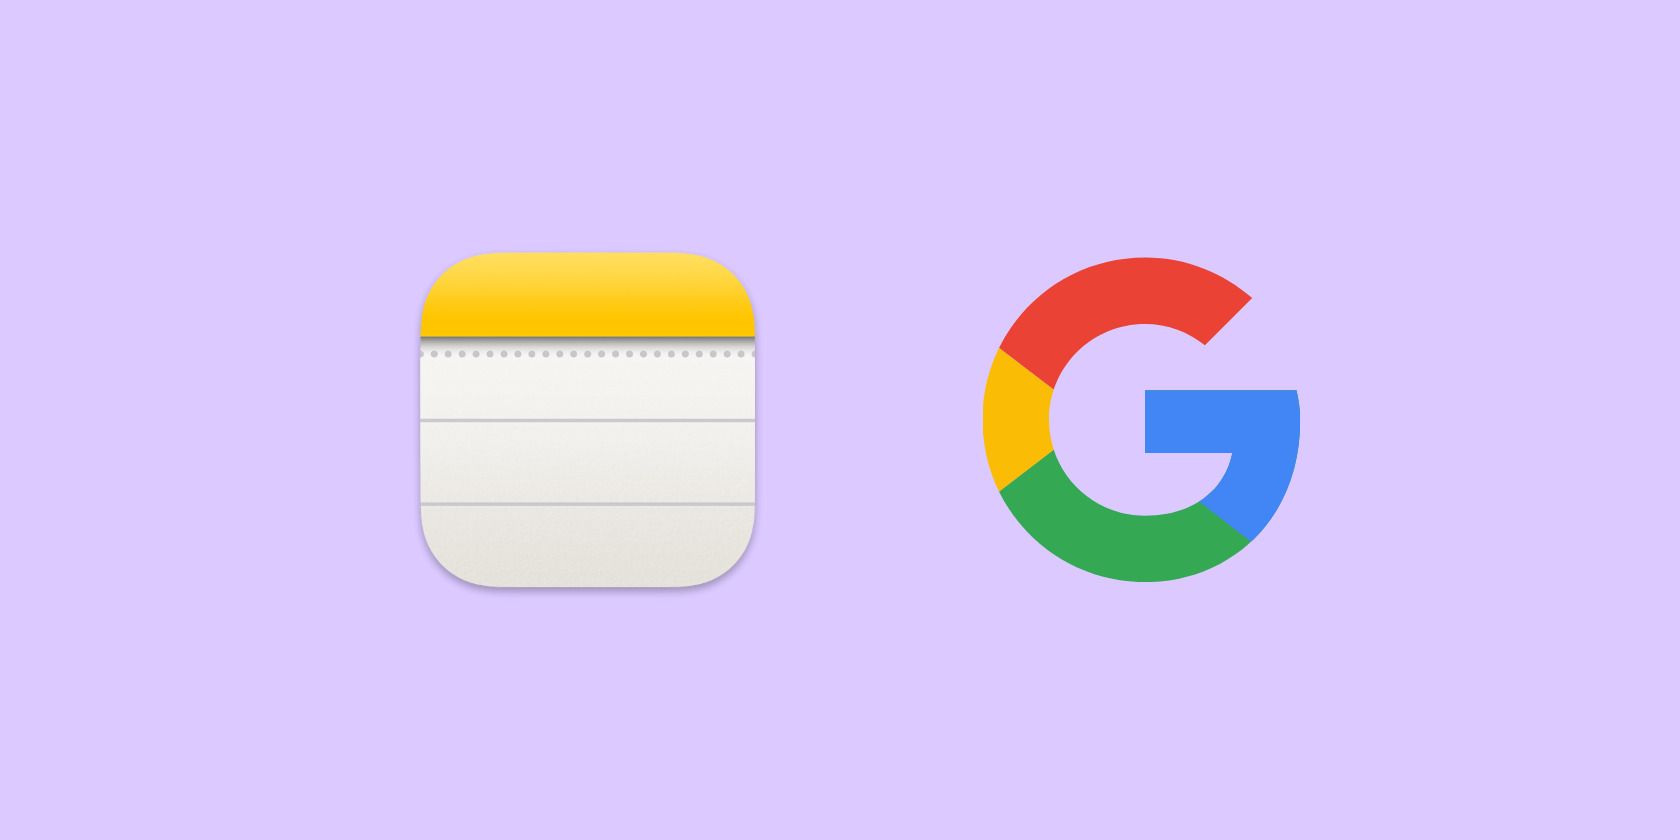 Apple Notes app logo and Google logo on a light background